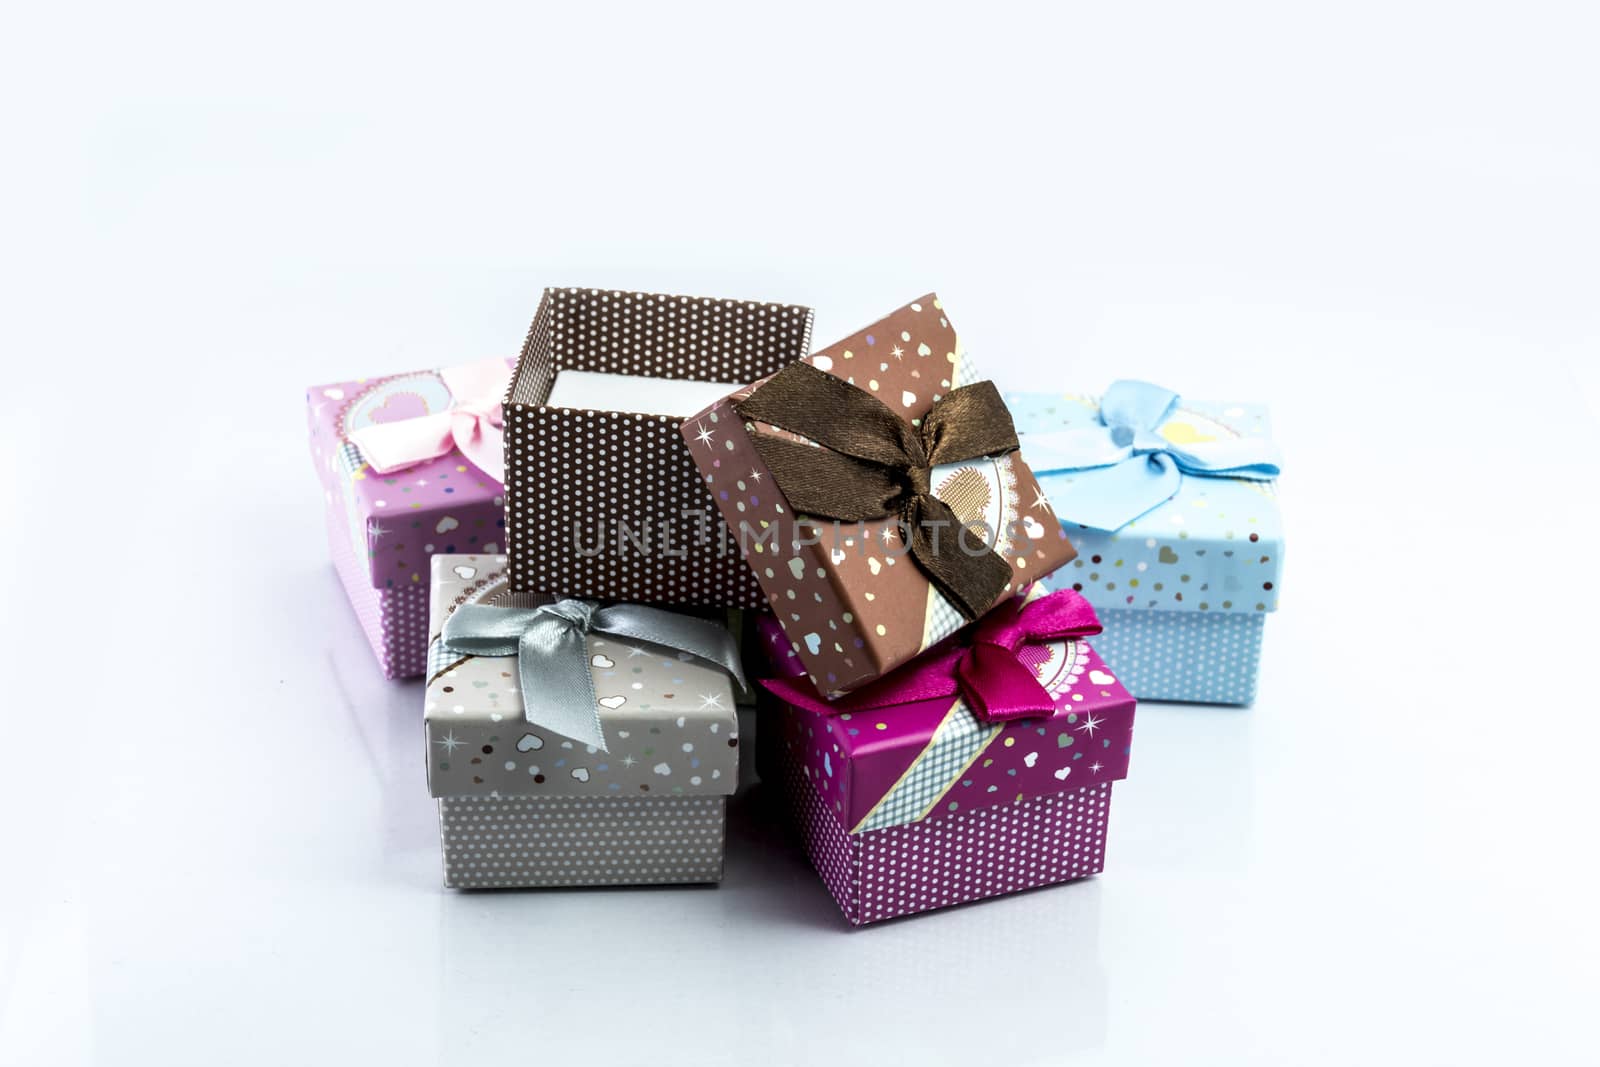 gift box isolated on white background, colorful gifts box.